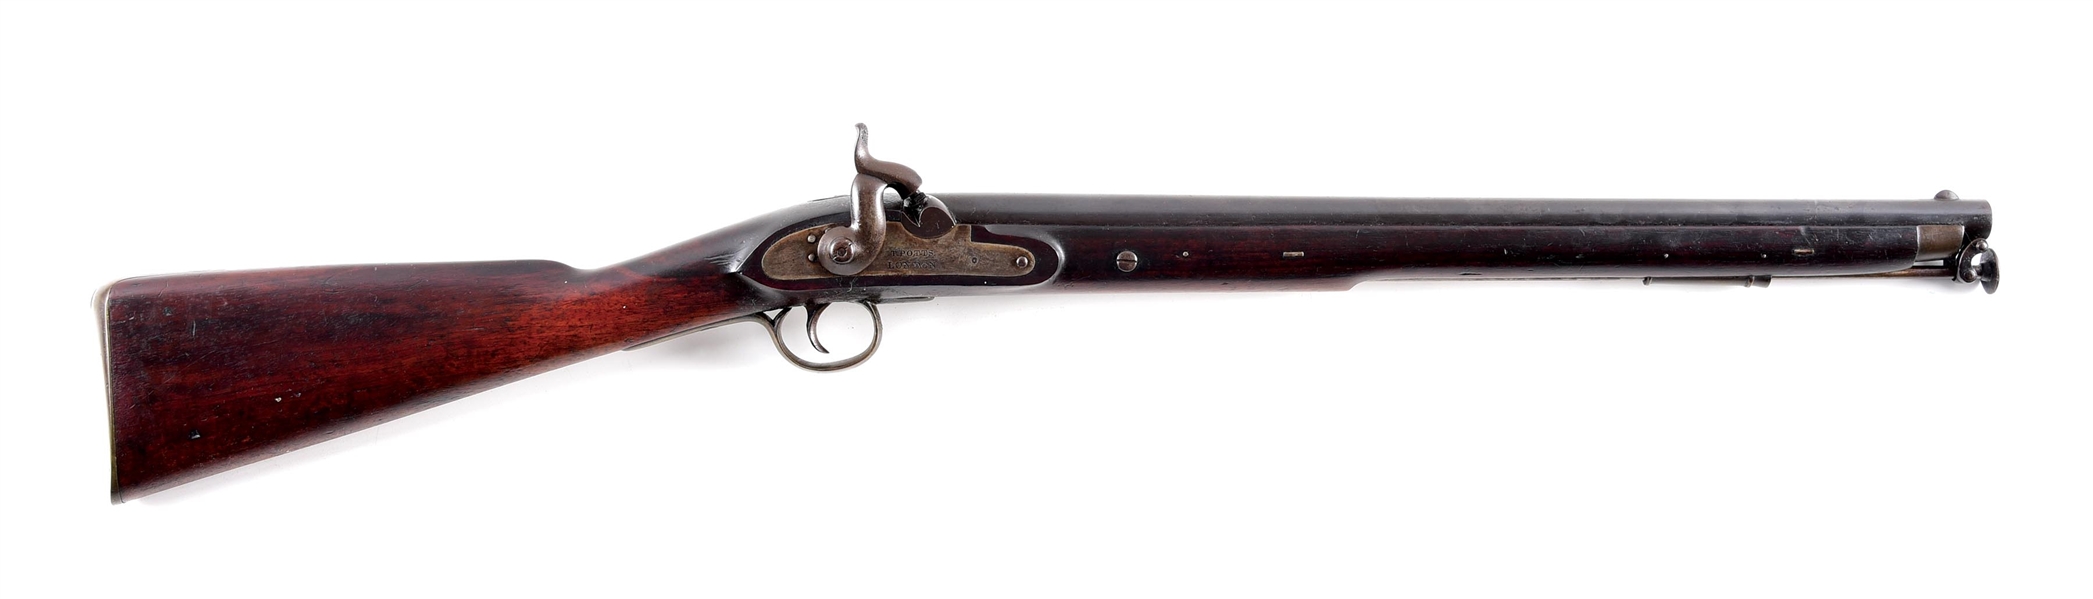 (A) COMMERCIAL PATTERN 1847 PADGET CAVALRY CARBINE.